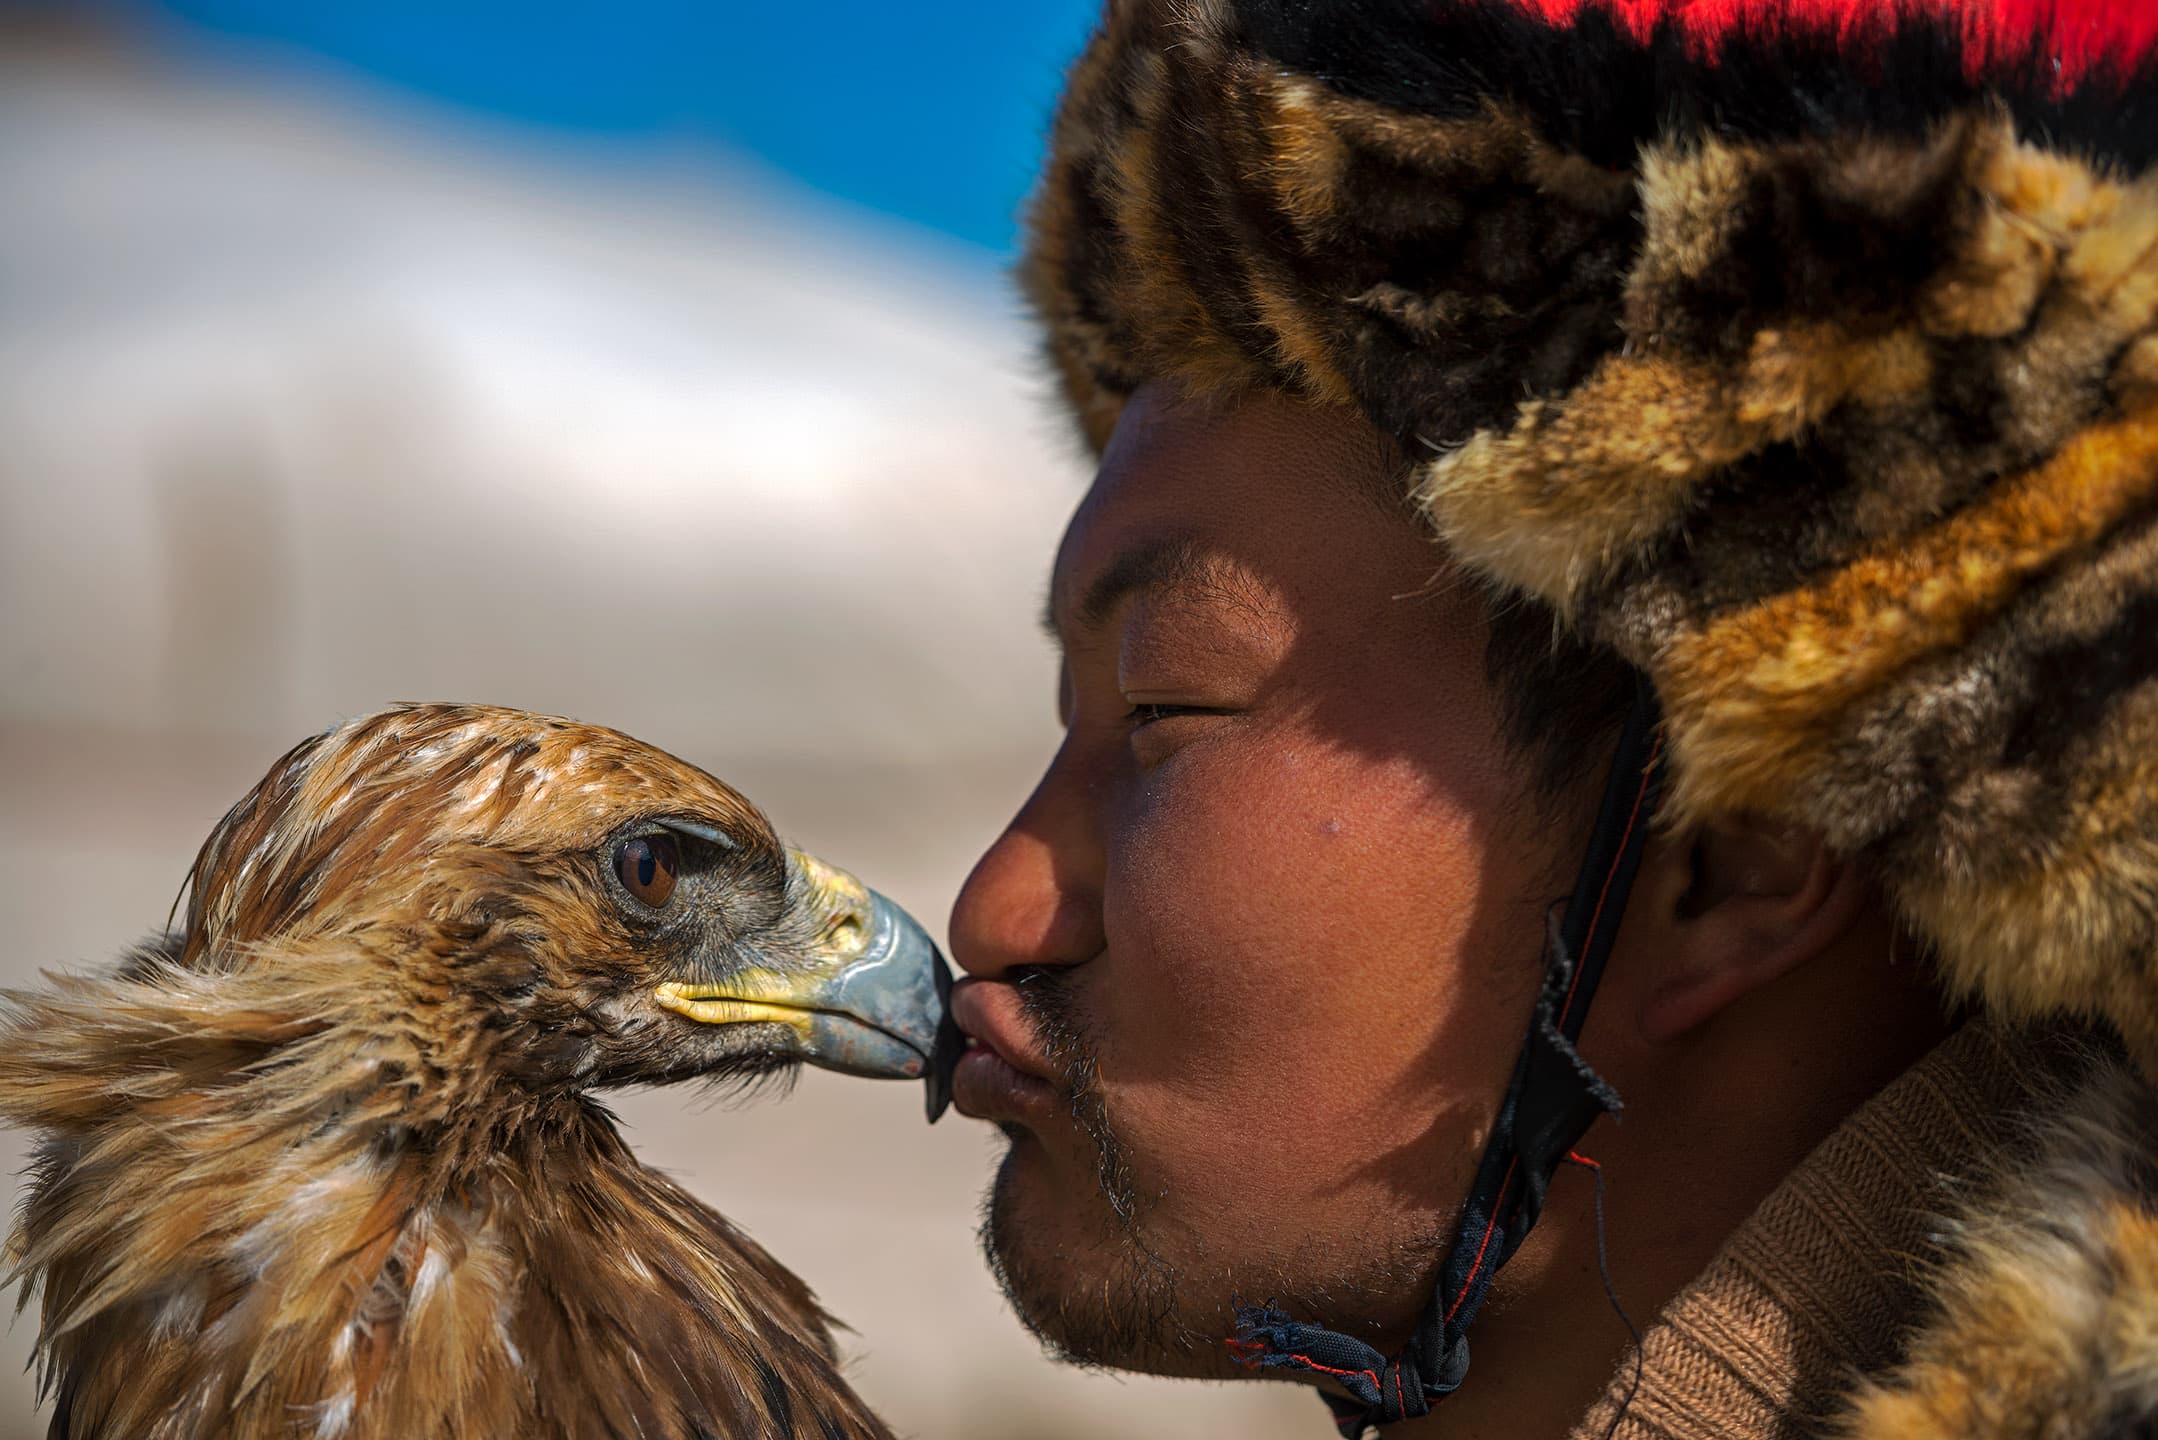 Alpamys Dalaikhan, a burkitshi (eagle hunter) kisses his eagle, illustrating the extraordinary bond that is created between the burkitshi and his bird in Bayan-Ölgii Province in western Mongolia on September 29, 2017.  Alpamys was in Bayan-Ölgii for the Golden Eagle Festival, an annual gathering and celebration of the burkitshi.  Alpamys posed for this portrait at the request of the photographer.